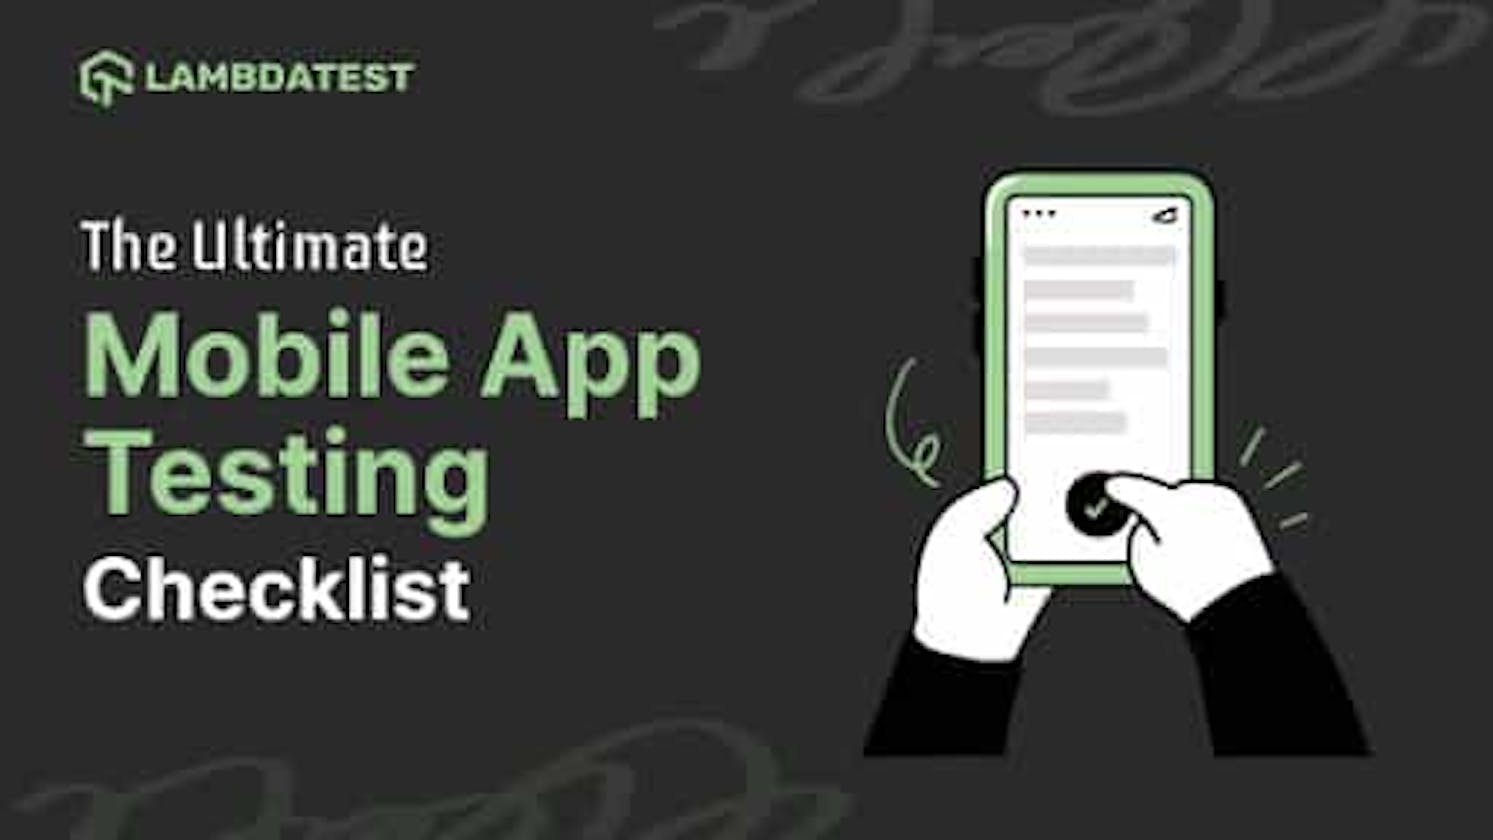 The Ultimate Mobile App Testing Checklist